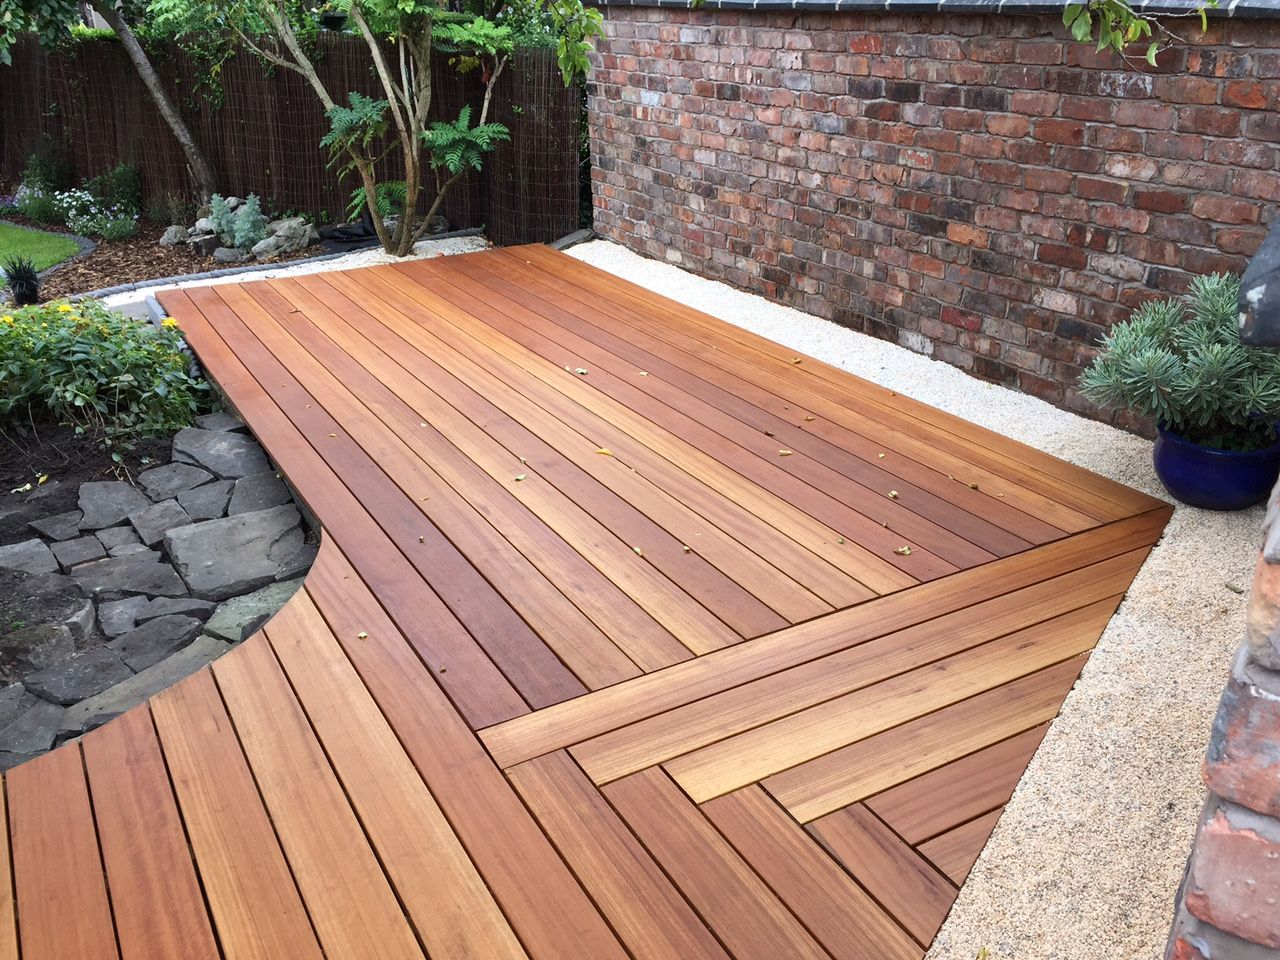 20 Wonderful Garden Decking Ideas With Best Decking Designs For Your intended for sizing 1280 X 960